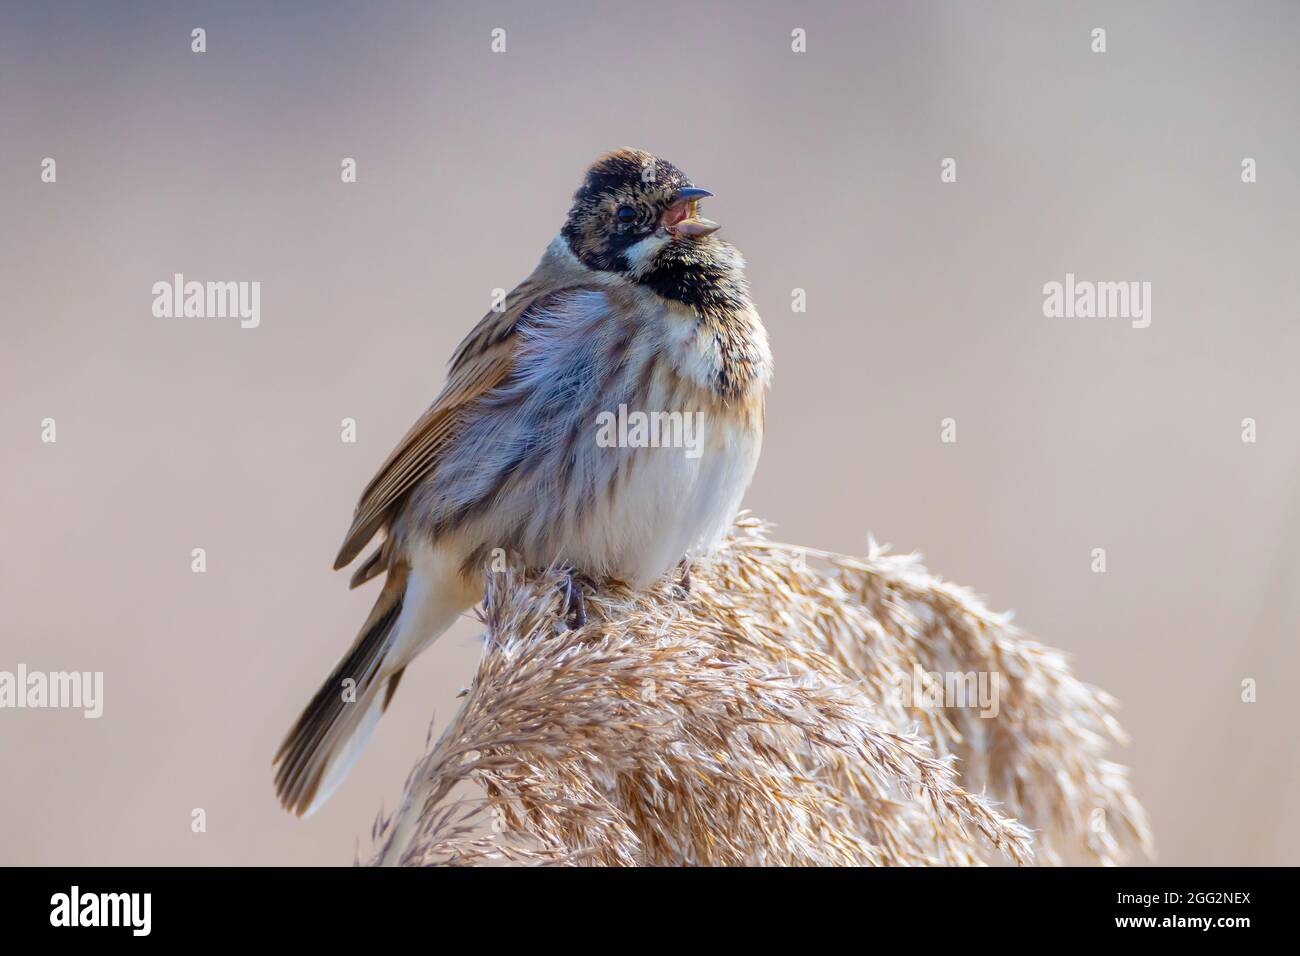 A common reed bunting Emberiza schoeniclus sings a song on a reed plume Phragmites australis. The reed beds waving due to strong winds in Spring seaso Stock Photo